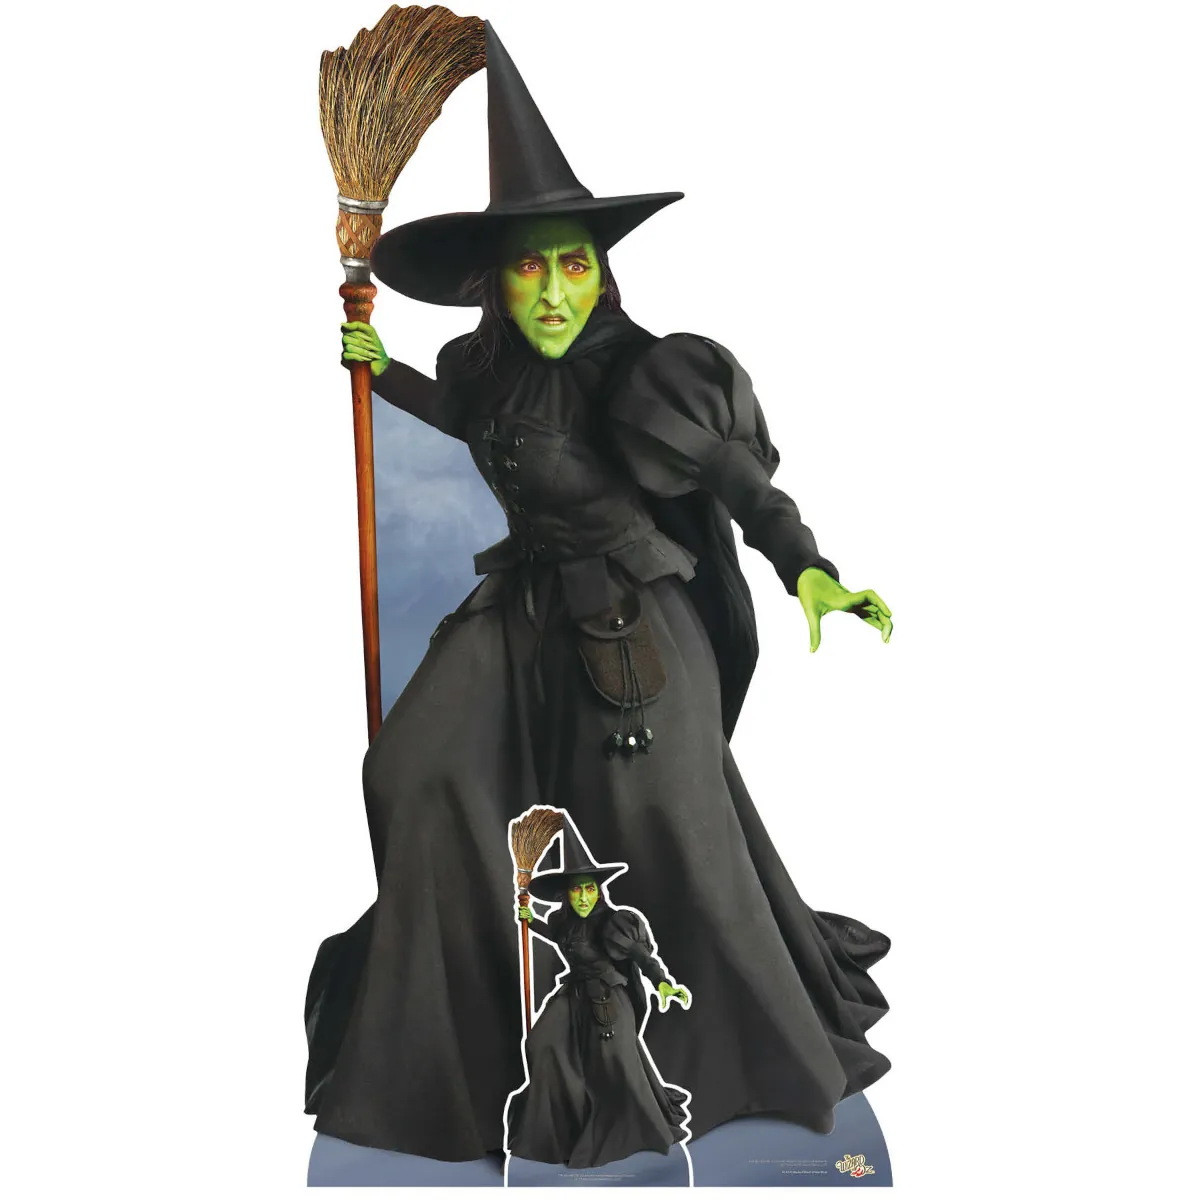 SC4225 Wicked Witch of the West (The Wizard of Oz) Lifesize + Mini Cardboard Cutout Standee Front